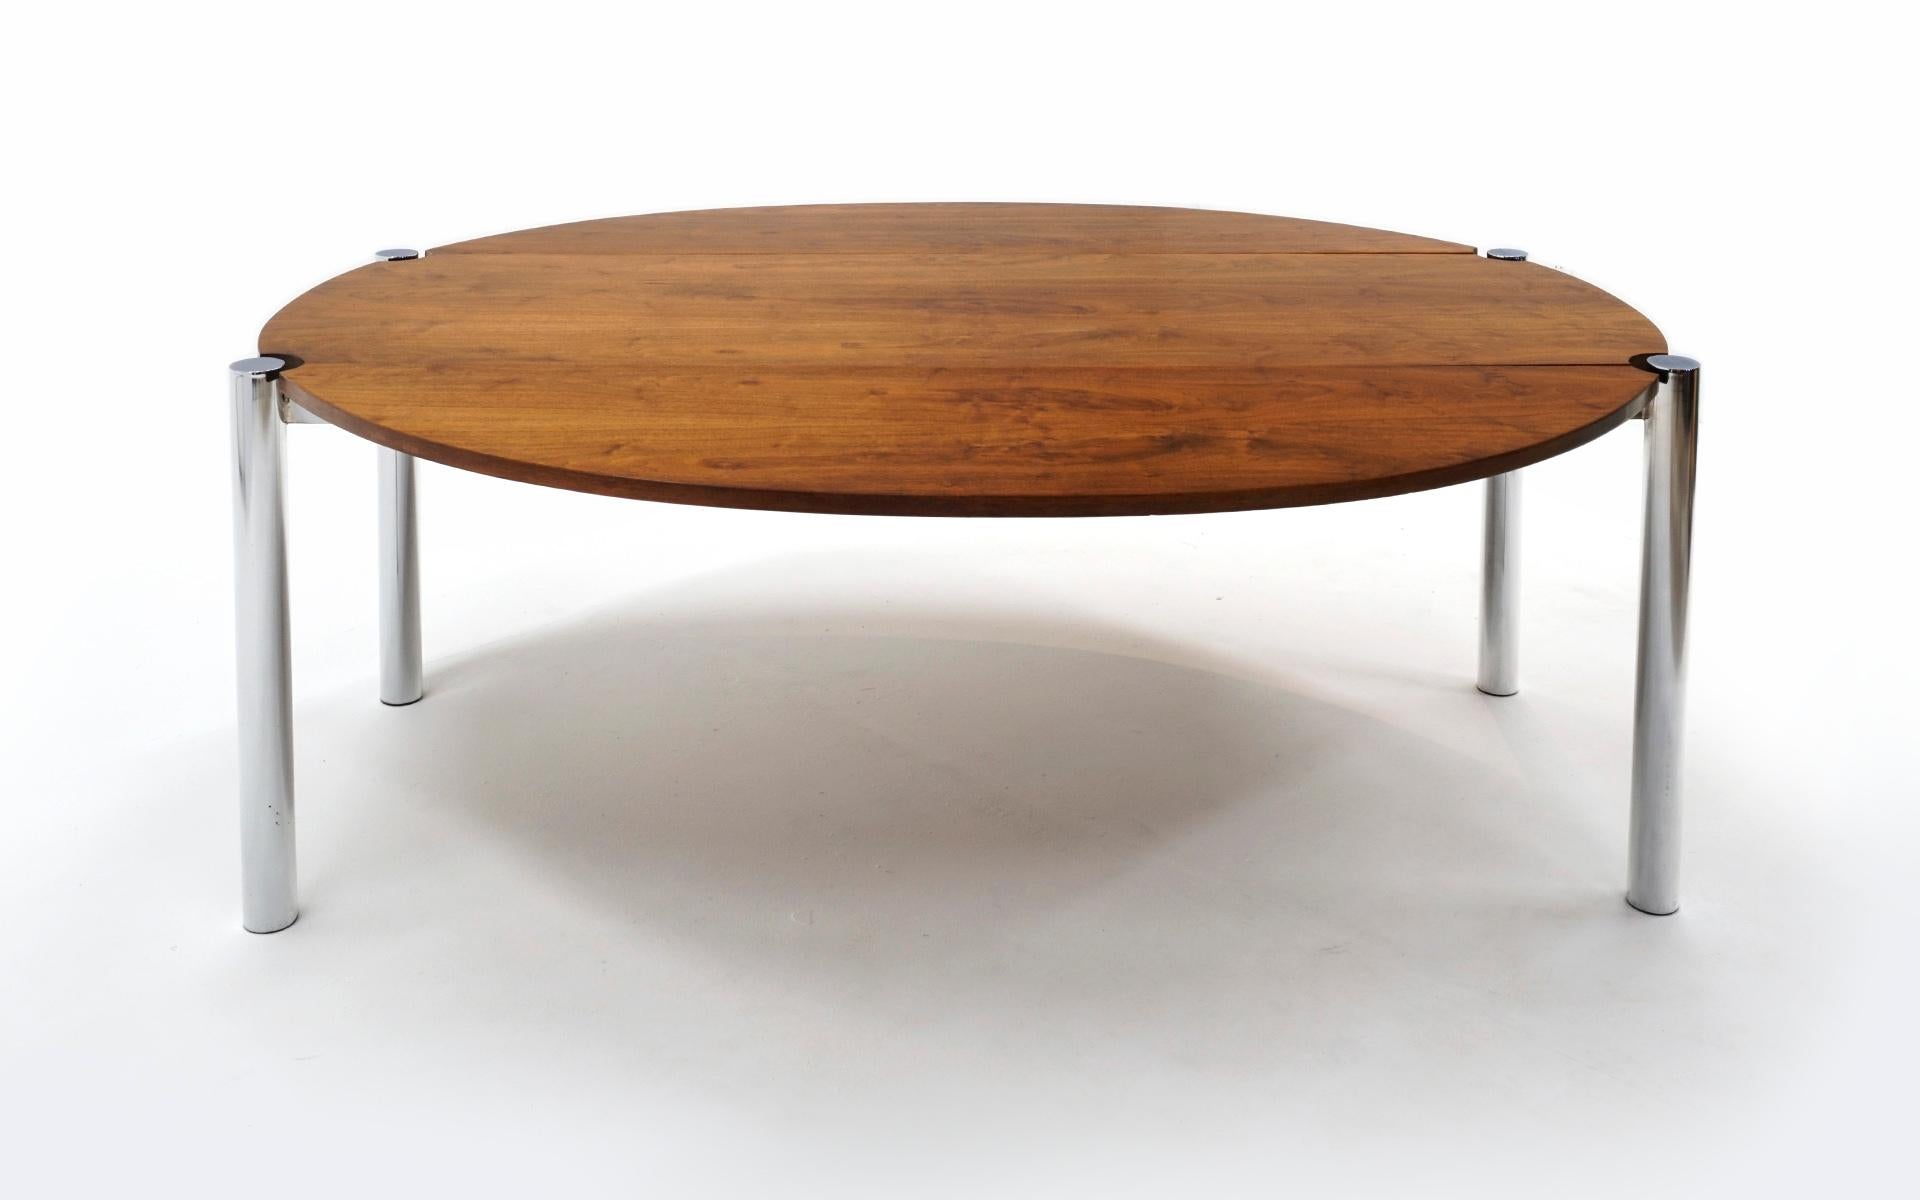 Rosewood drop-leaf dining / sofa table with round chrome legs. 72 inches long, 28 1/2 inches high and 27 3/4 inches deep with the leaves down and 60 1/2 inches wide with the leaves up. Light scratches in the finish and some light indentations.